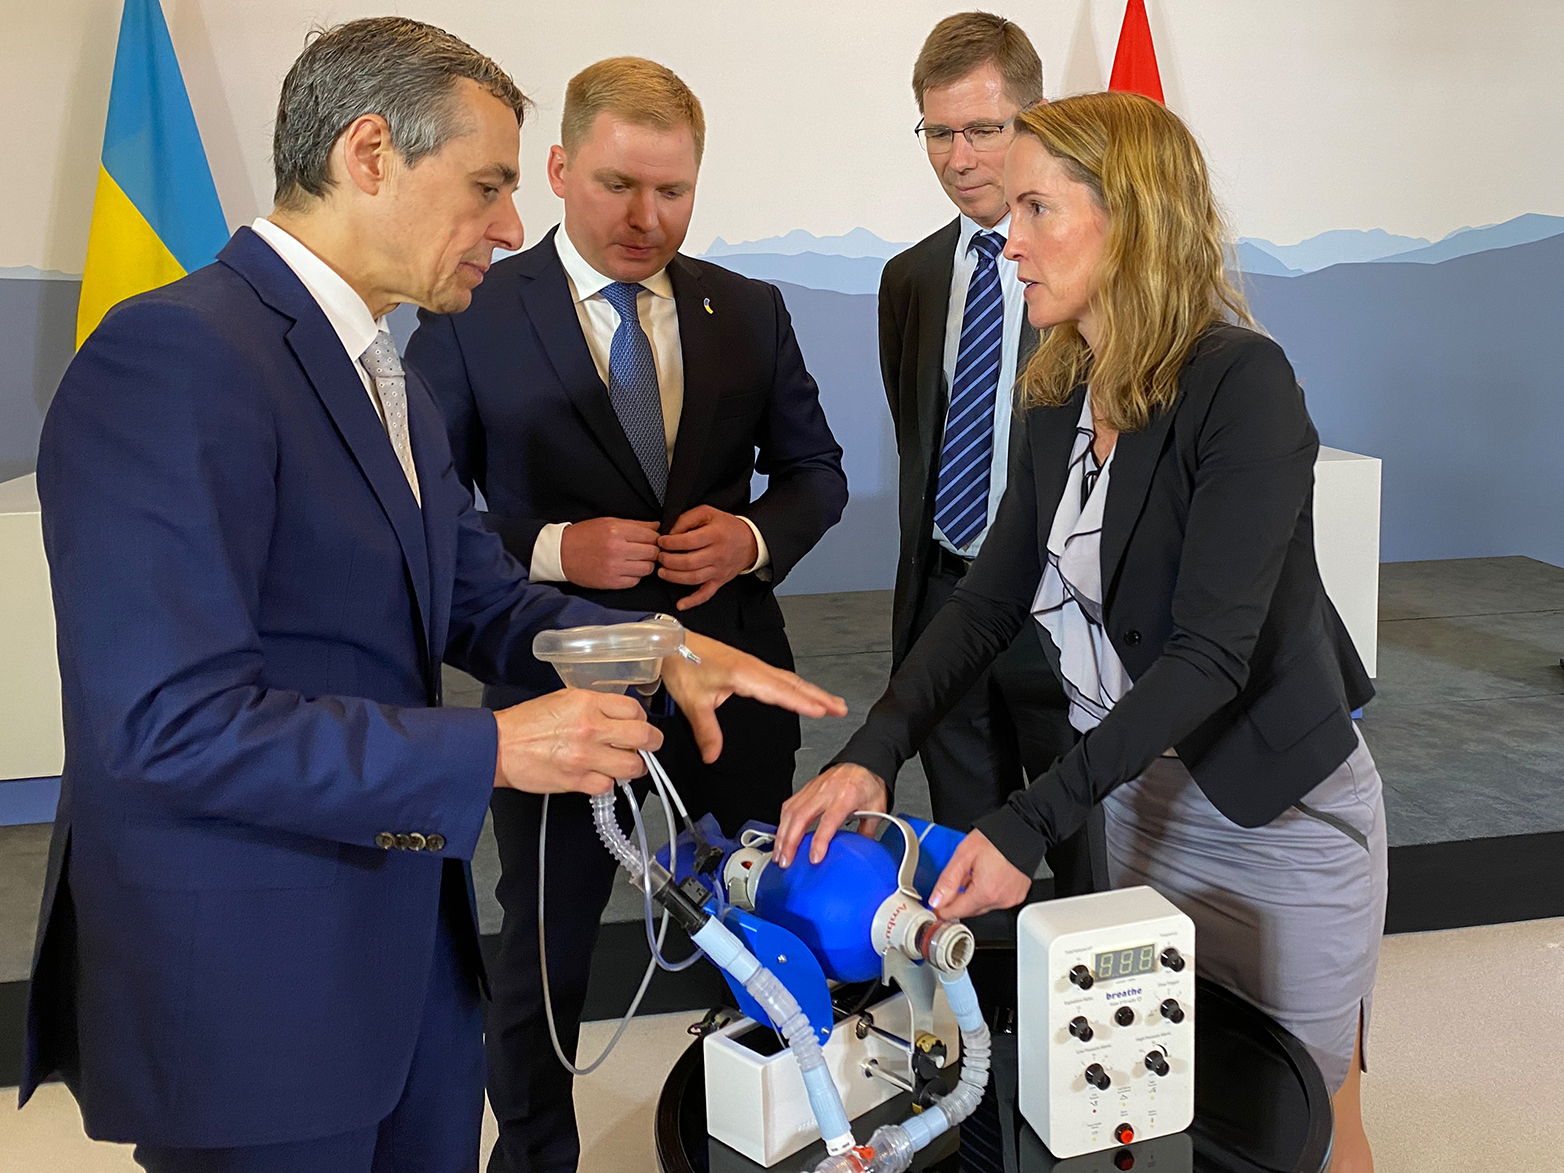 Kristina Shea discusses the new ventilator with Federal Councillor Ignazio Cassis, closely listened to by Ukraine's ambassador to Switzerland, Artem Rybchenko, and ETH President Joël Mesot. (Photo: ETH Zurich)